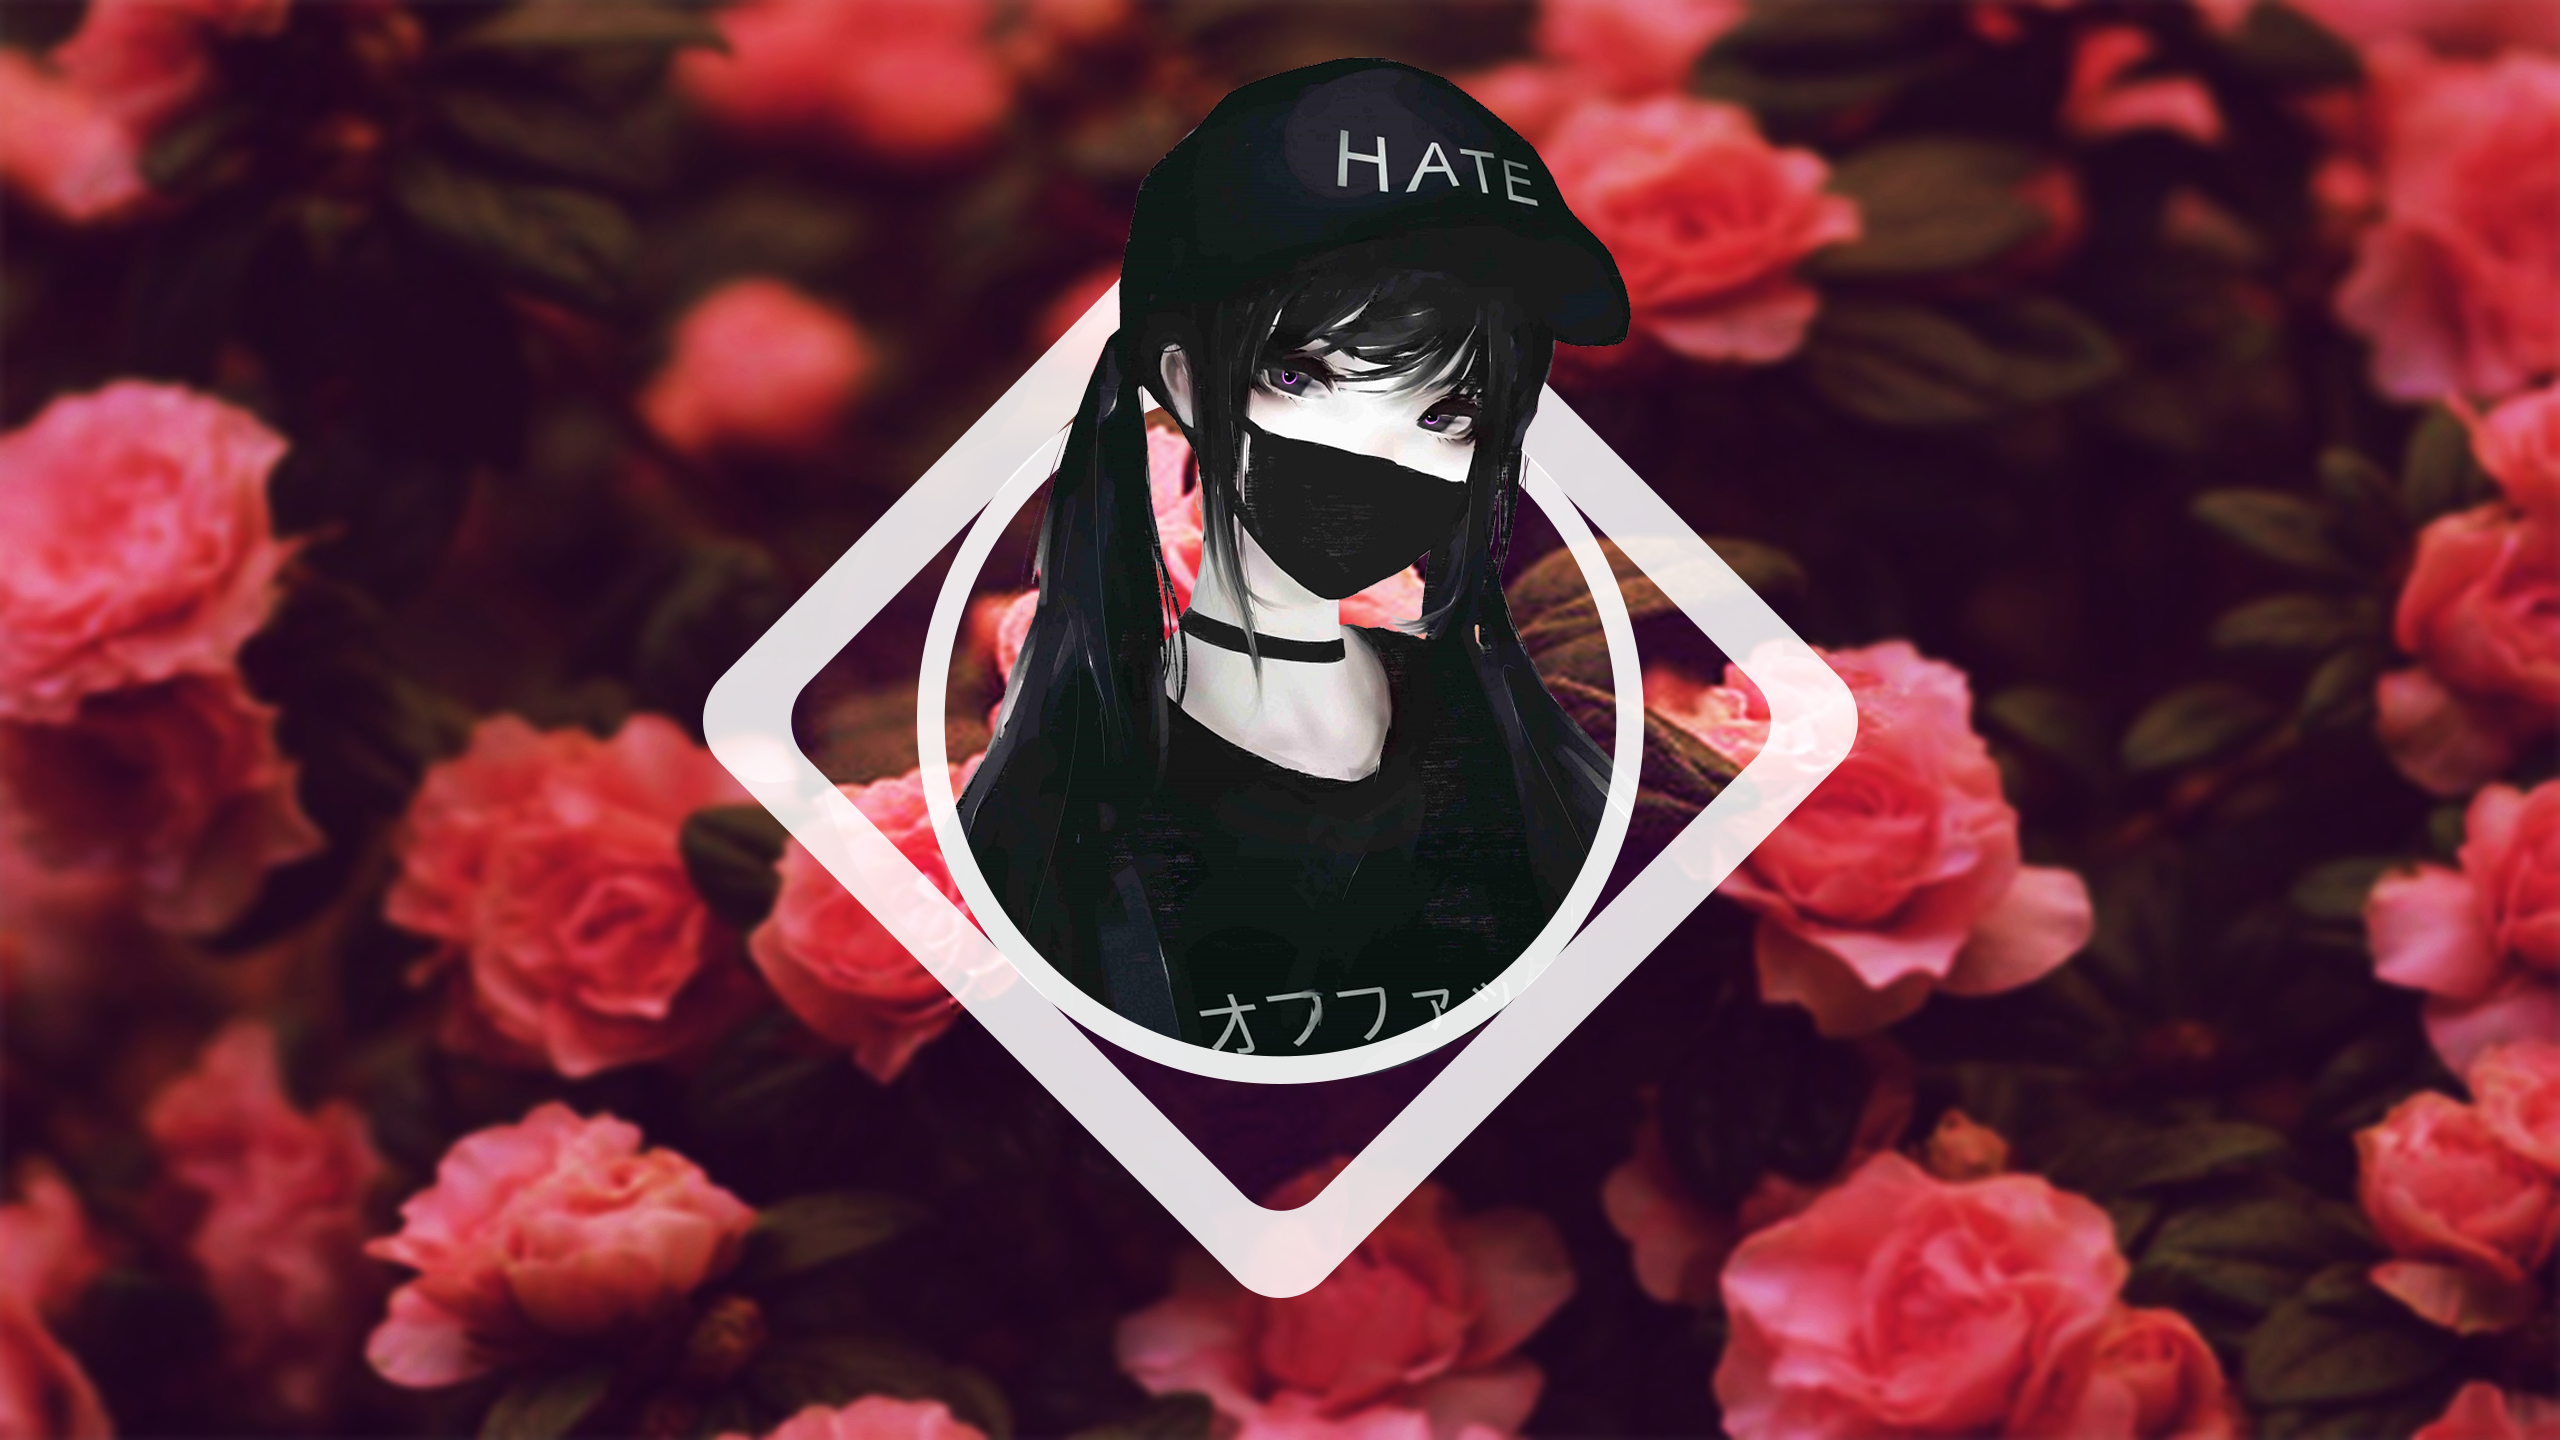 Picture In Picture Emo Roses Blurred Aoi Ogata Wallpaper:2560x1440